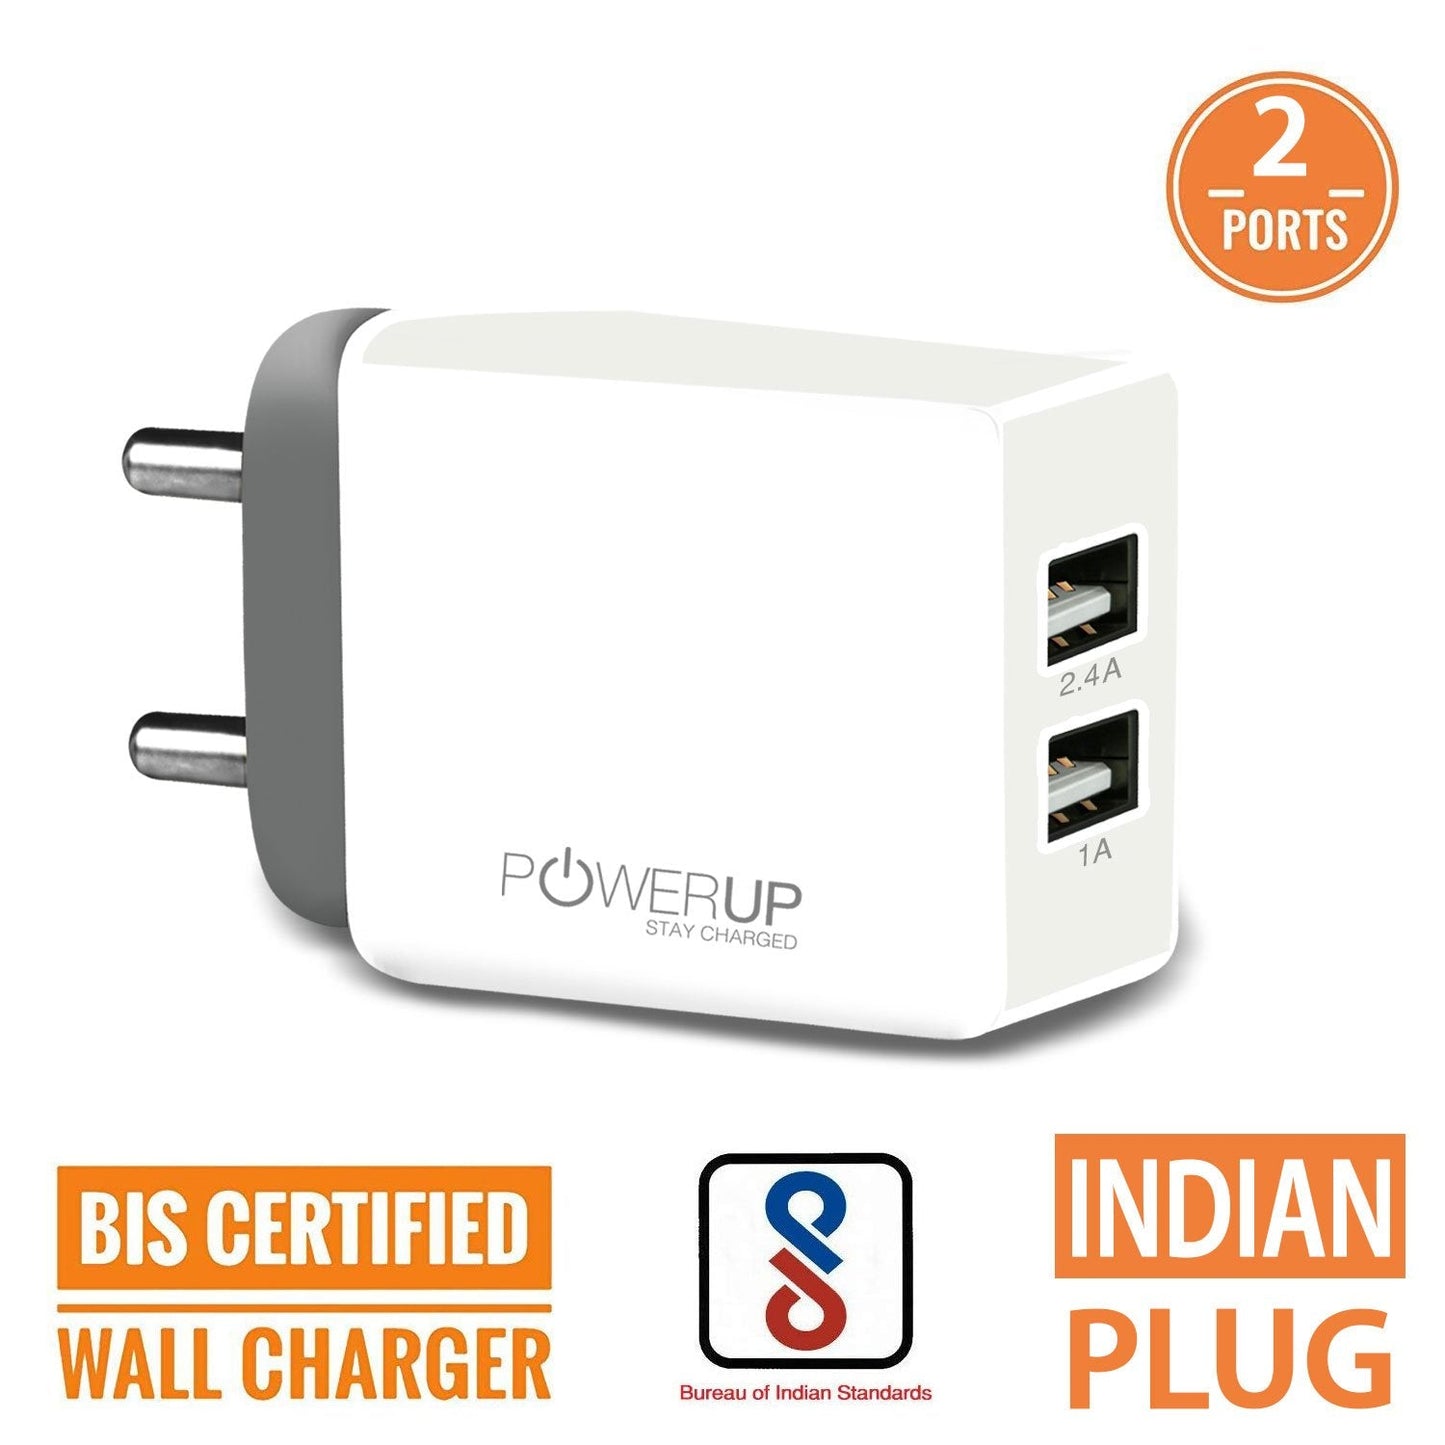 Powerup Amp 3.4a Wall Charger 17w 2usb Port Ultra Smart - White